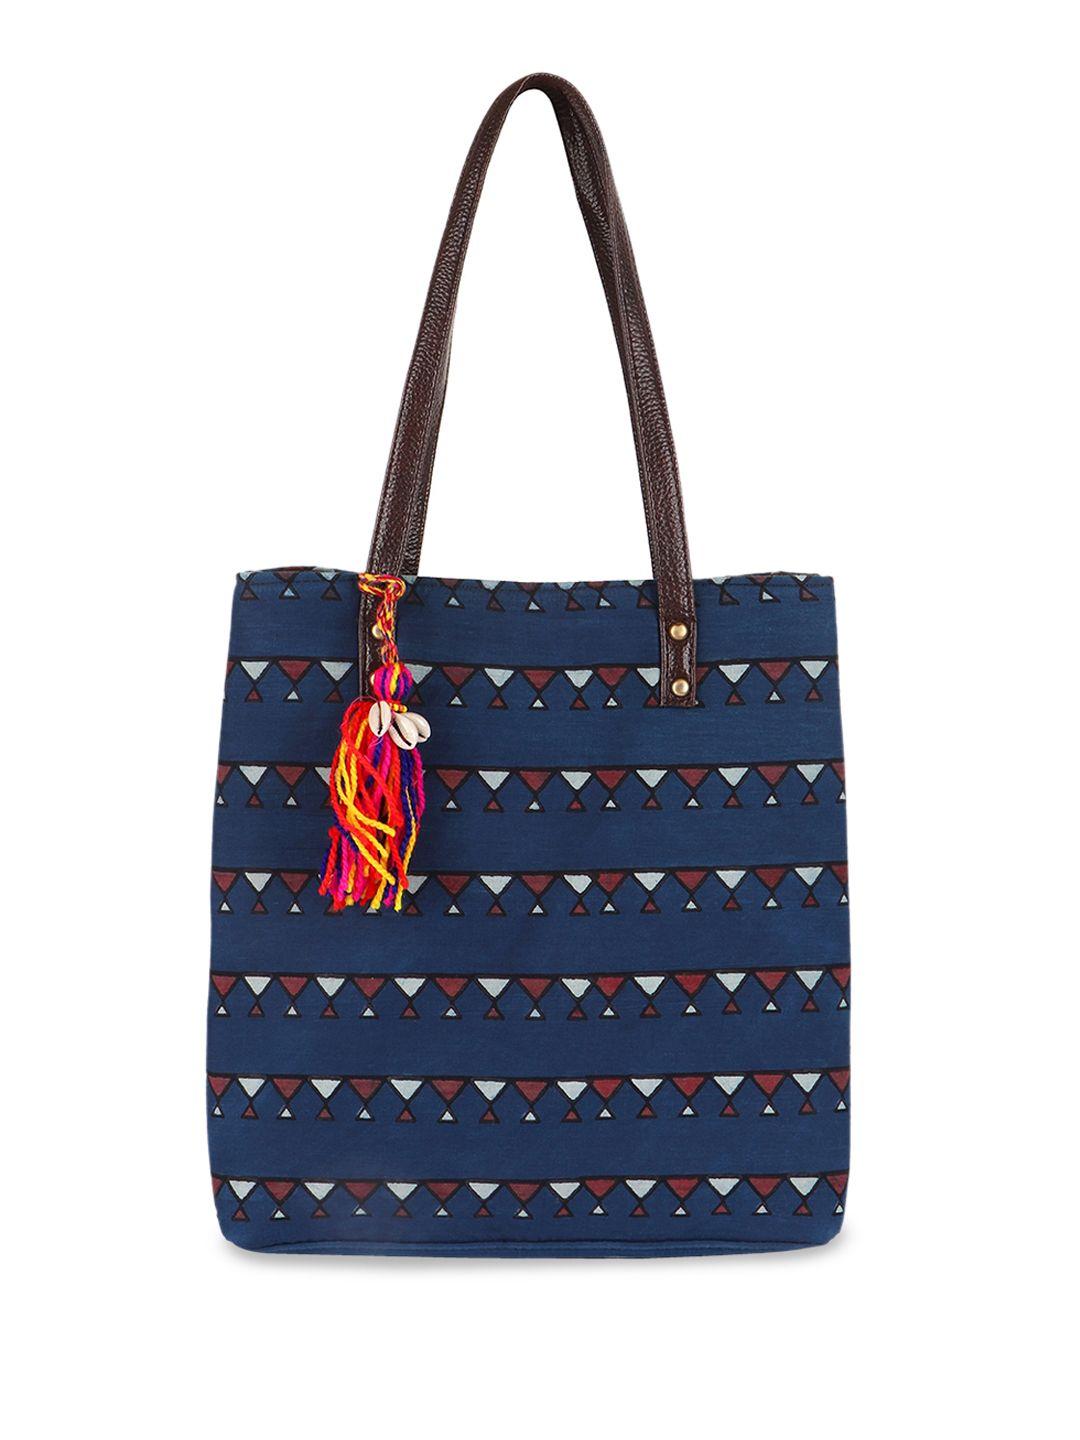 vivinkaa geometric printed cotton structured shoulder bag with tasselled